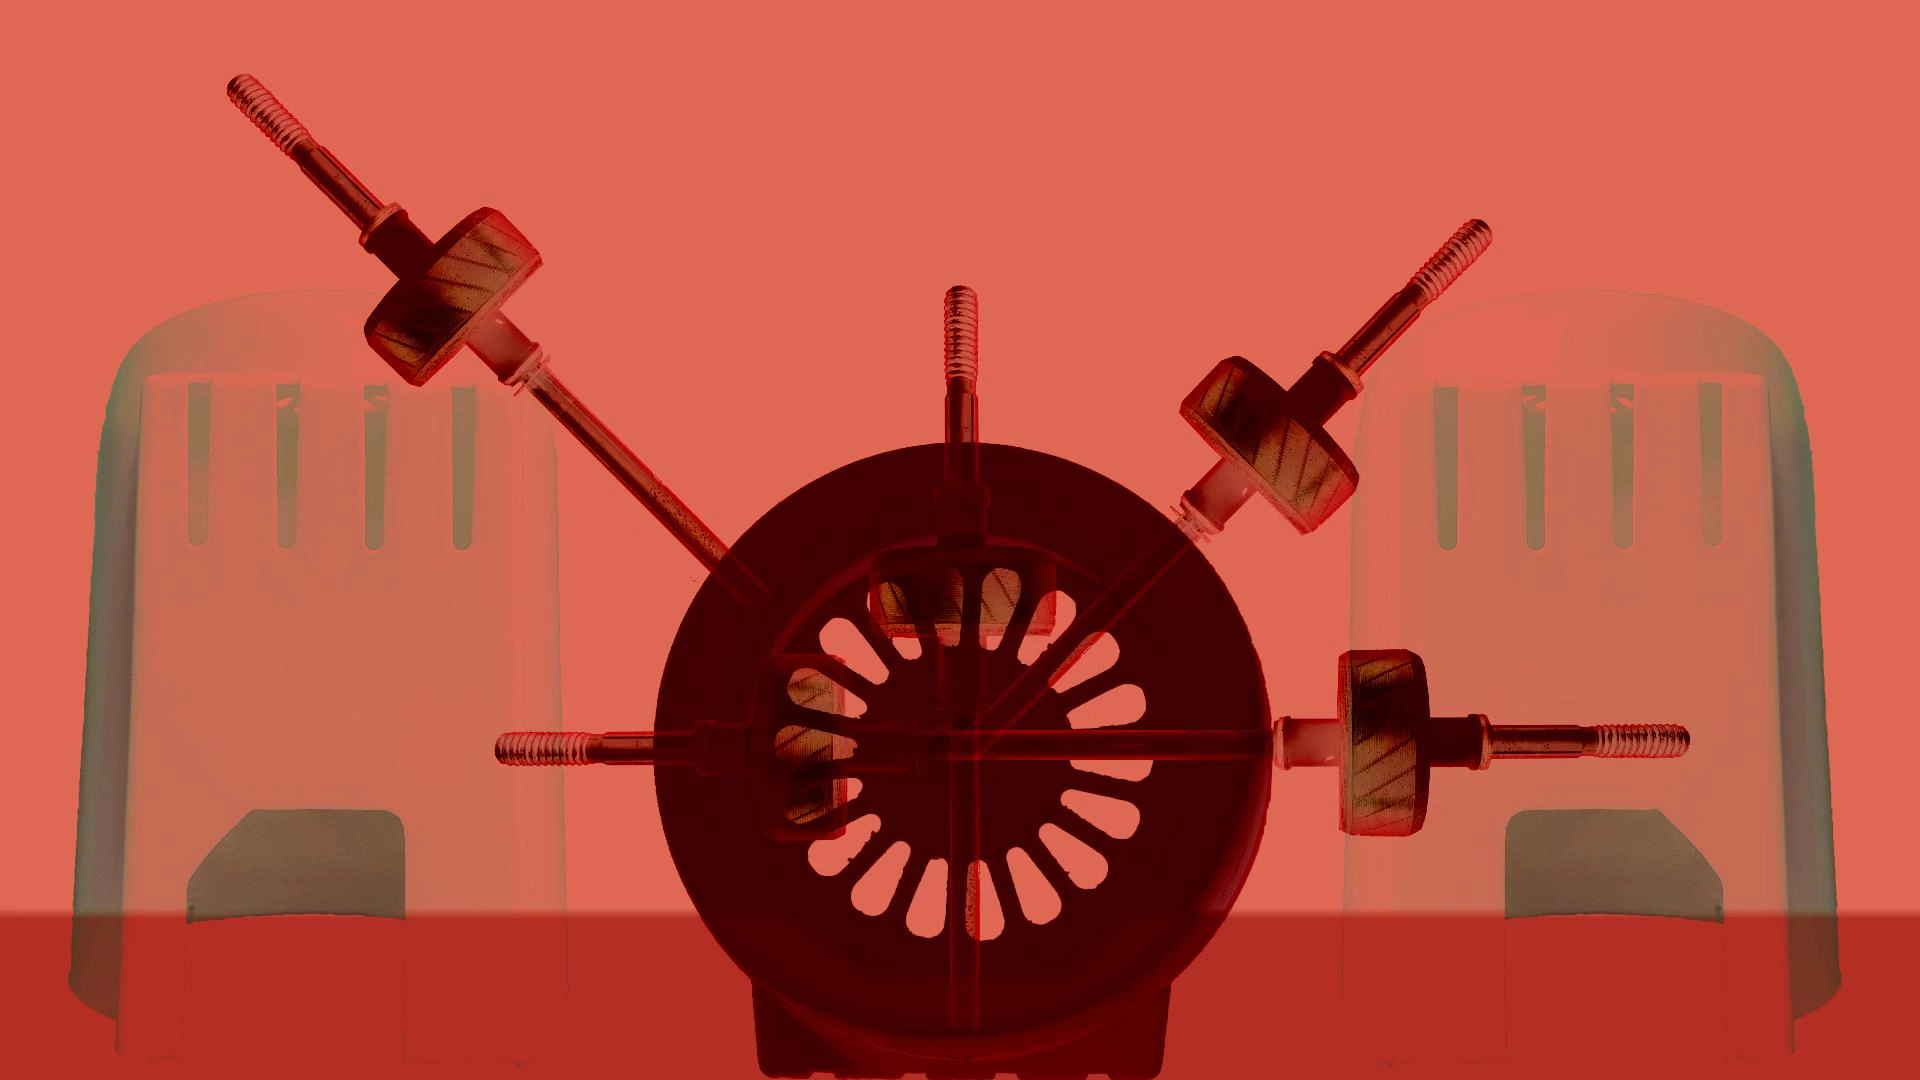 Screenshot from Eternal Engine, a red circular machine with pumps. There is two cyclindrical towers in the background flanking the machine